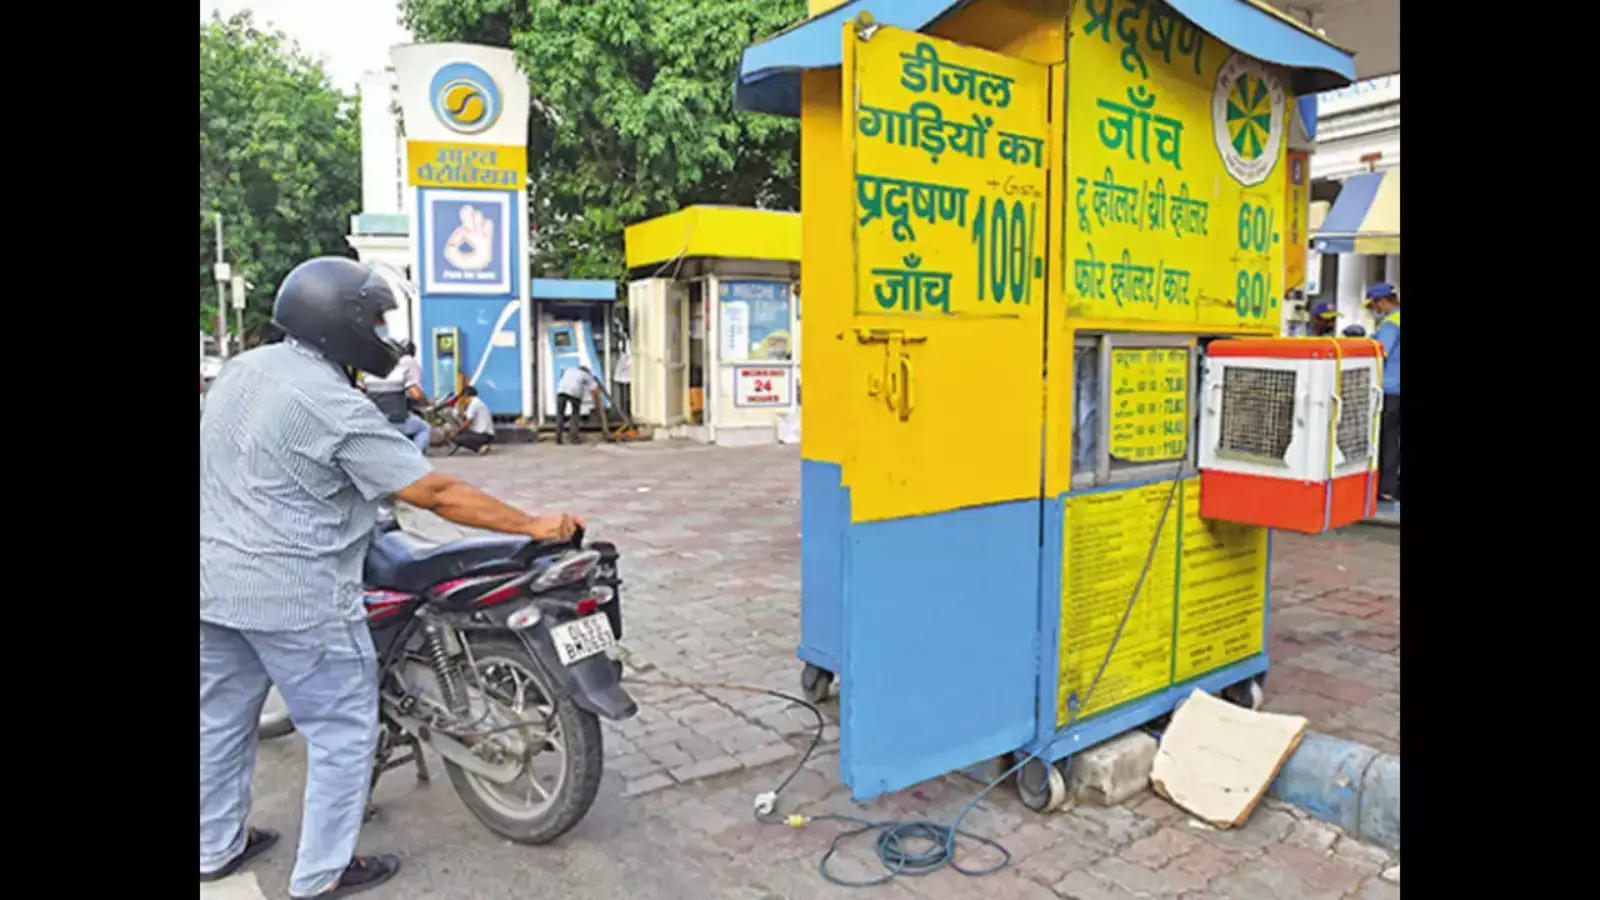 Around 600 PUC centres shut in Delhi amid protest by petrol dealers over fee hike 